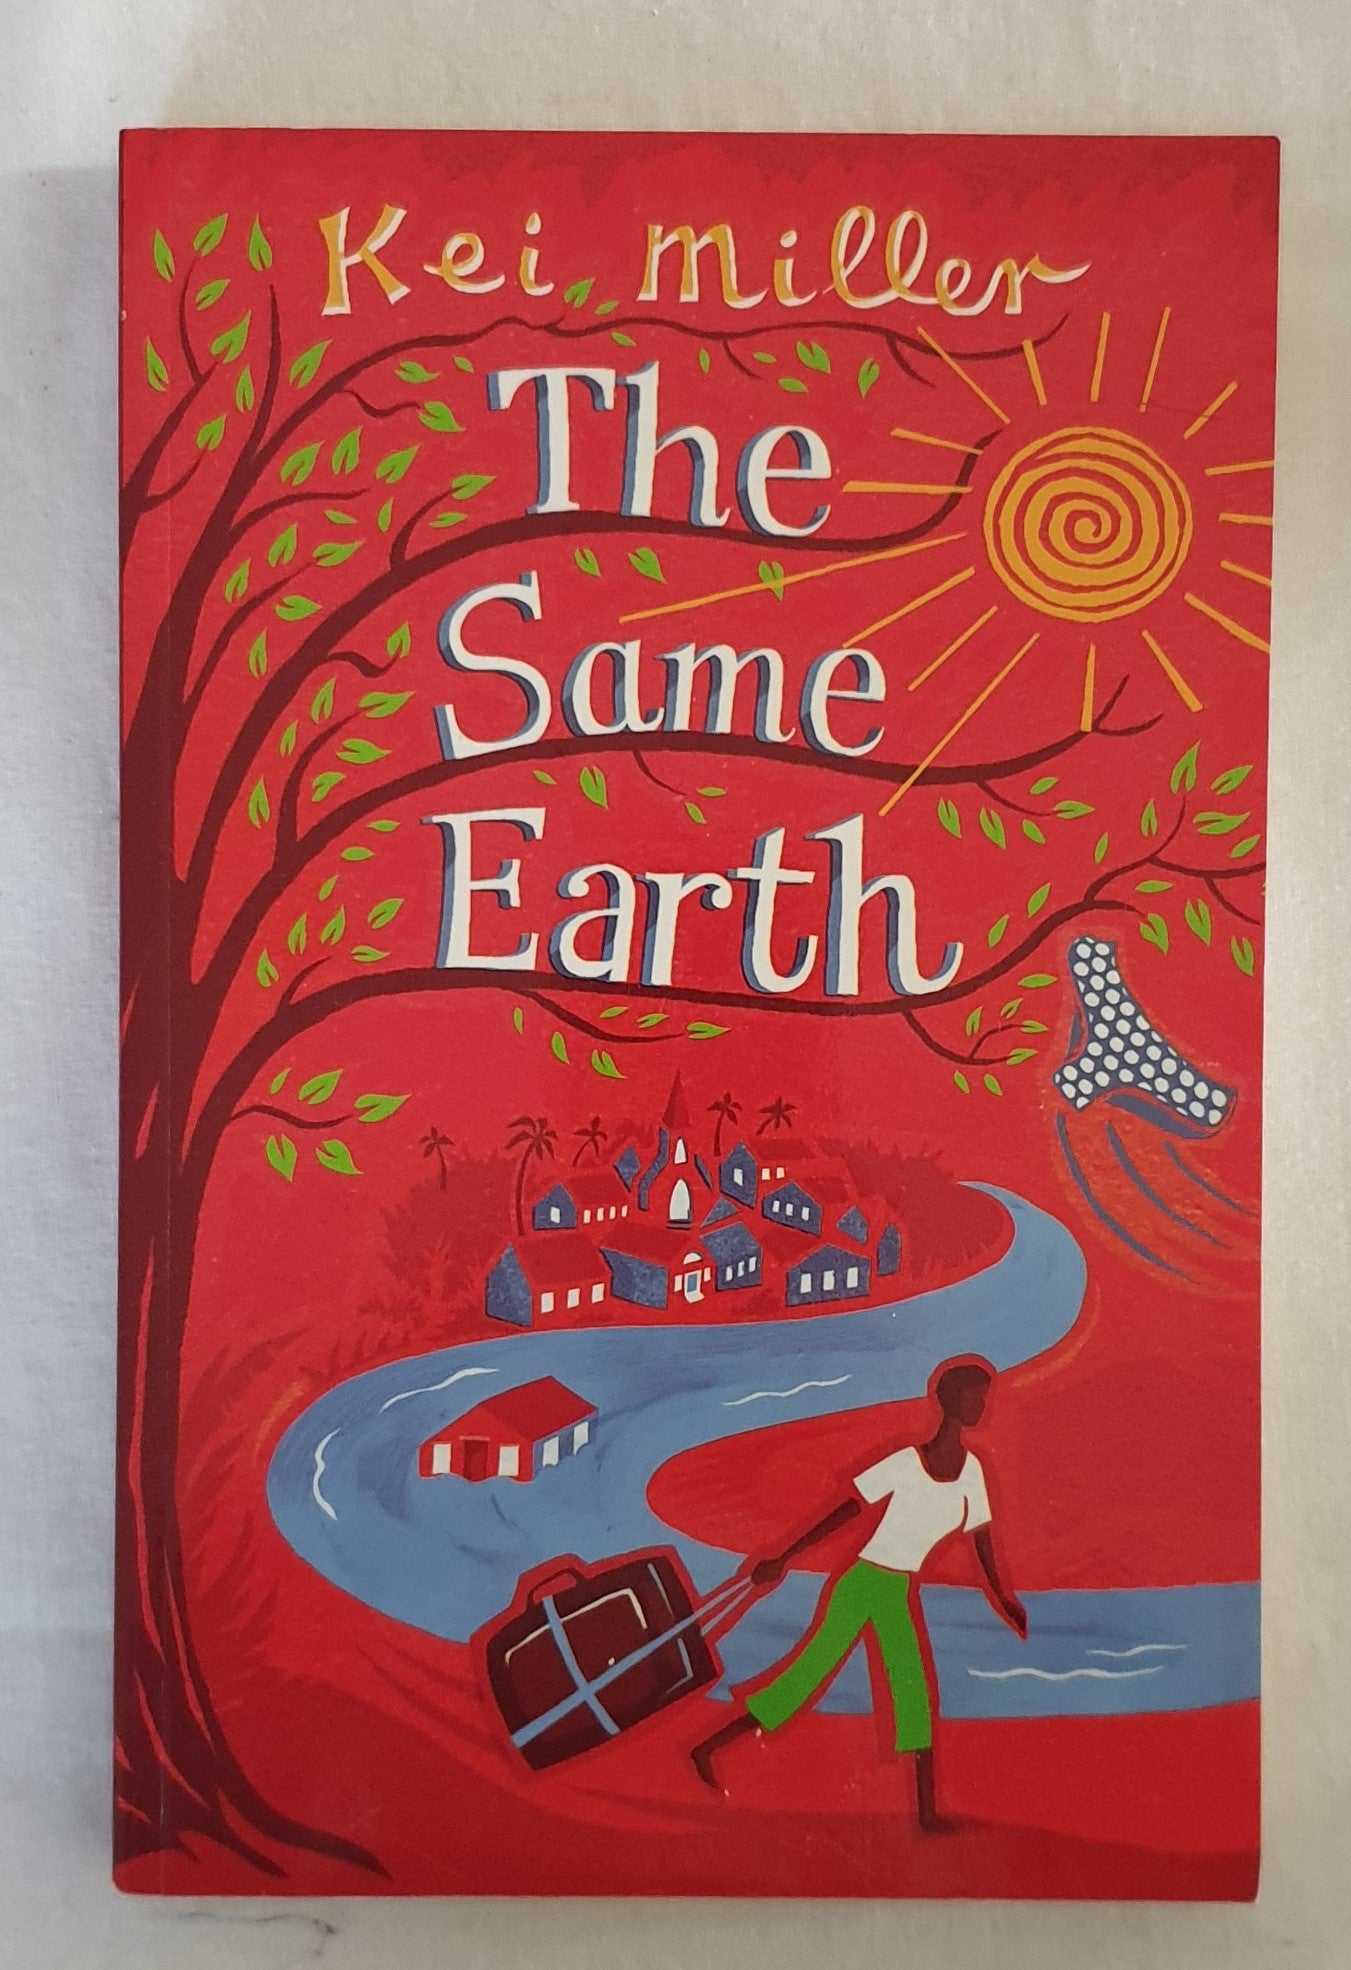 The Same Earth by Kei Miller